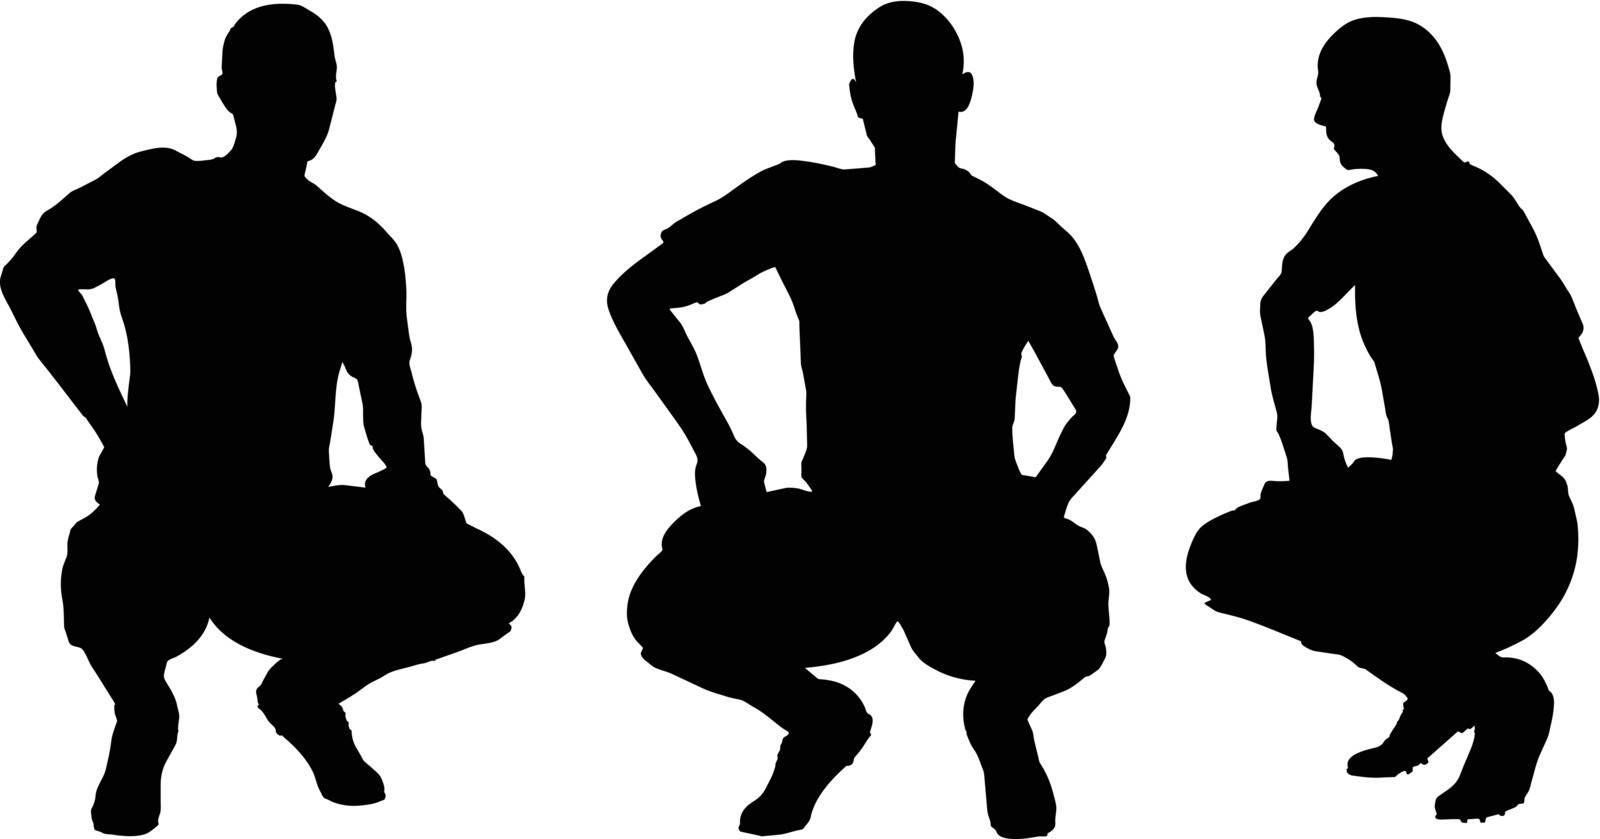 poses of soccer players silhouettes in sitting position by Istanbul2009